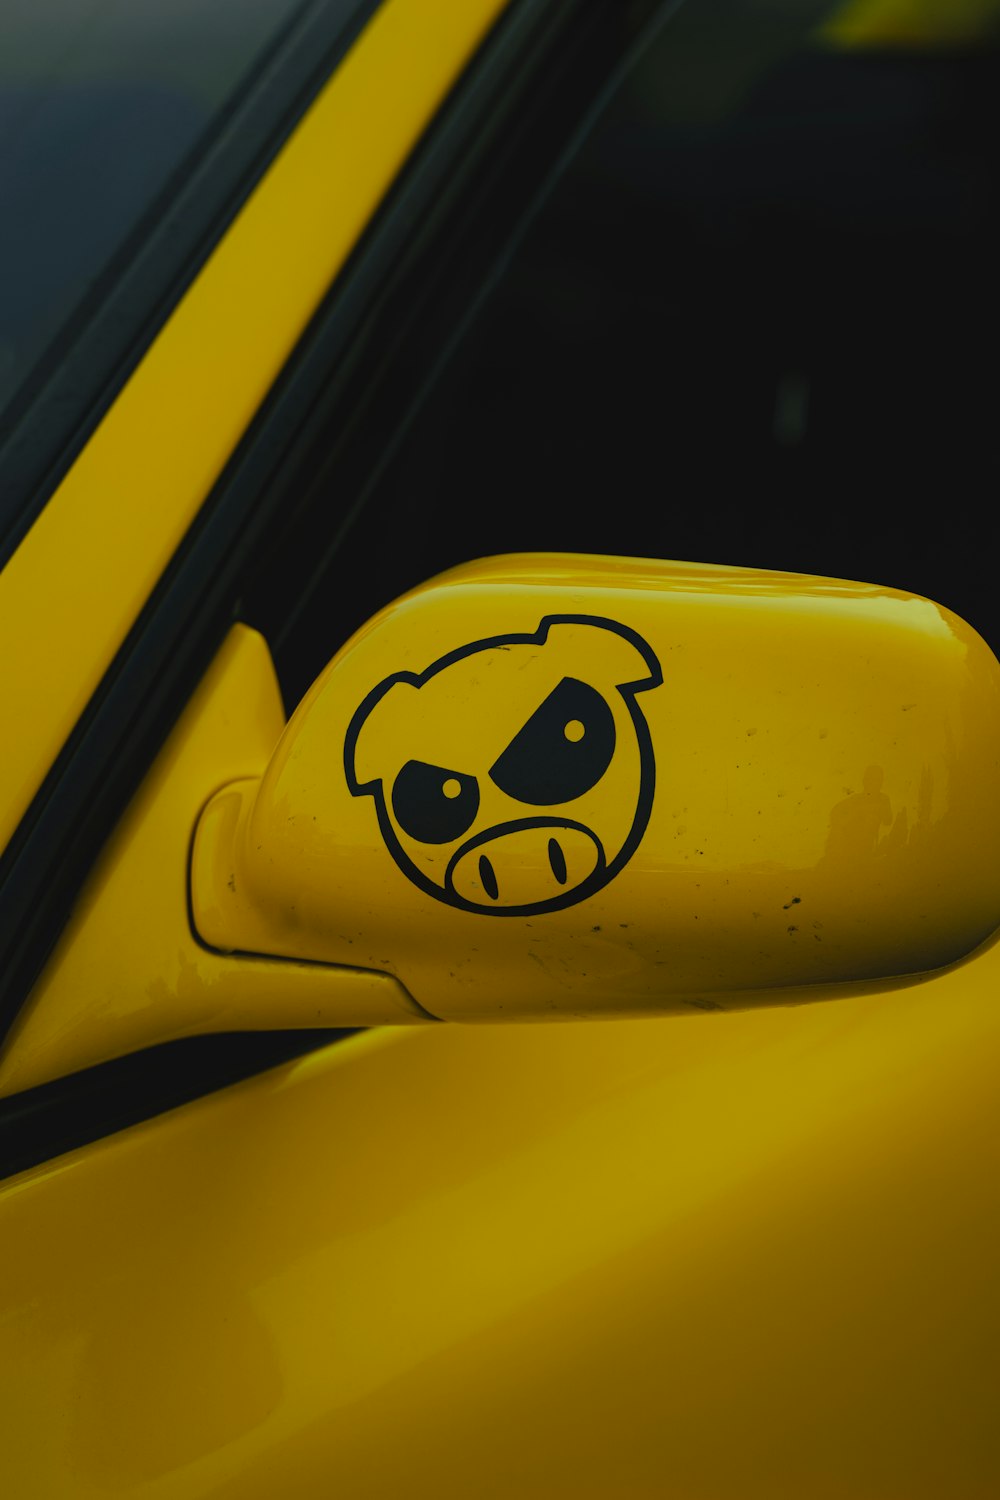 a close up of a yellow car with a smiley face on it